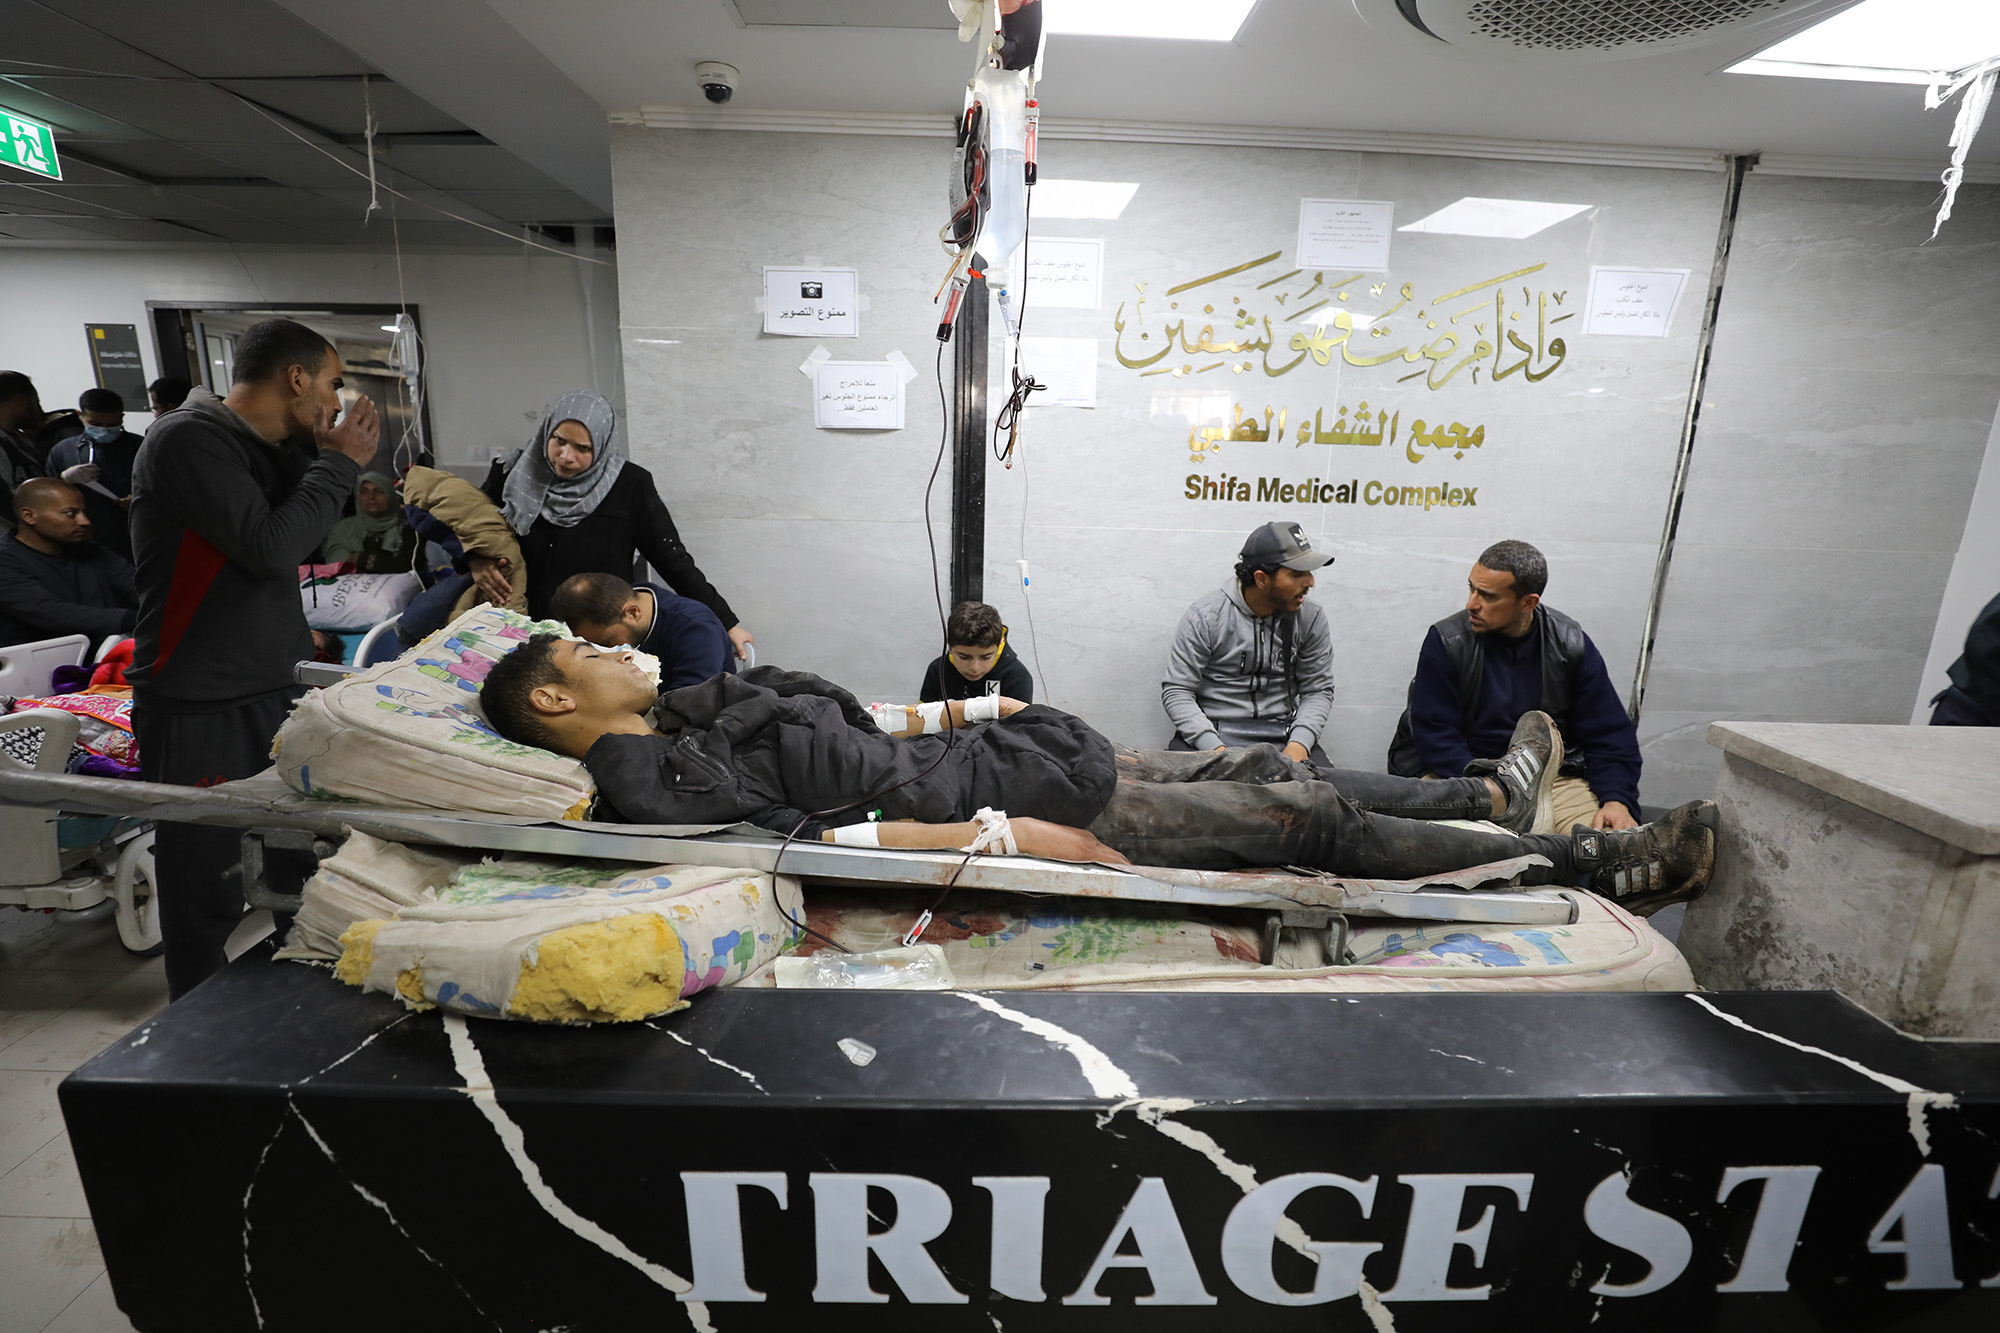 Injured Palestinians receive medical treatment in Al-Shifa Hospital after Israeli forces open fire on Palestinians waiting for humanitarian aid trucks at Al-Rashid Street in Gaza on February 29.